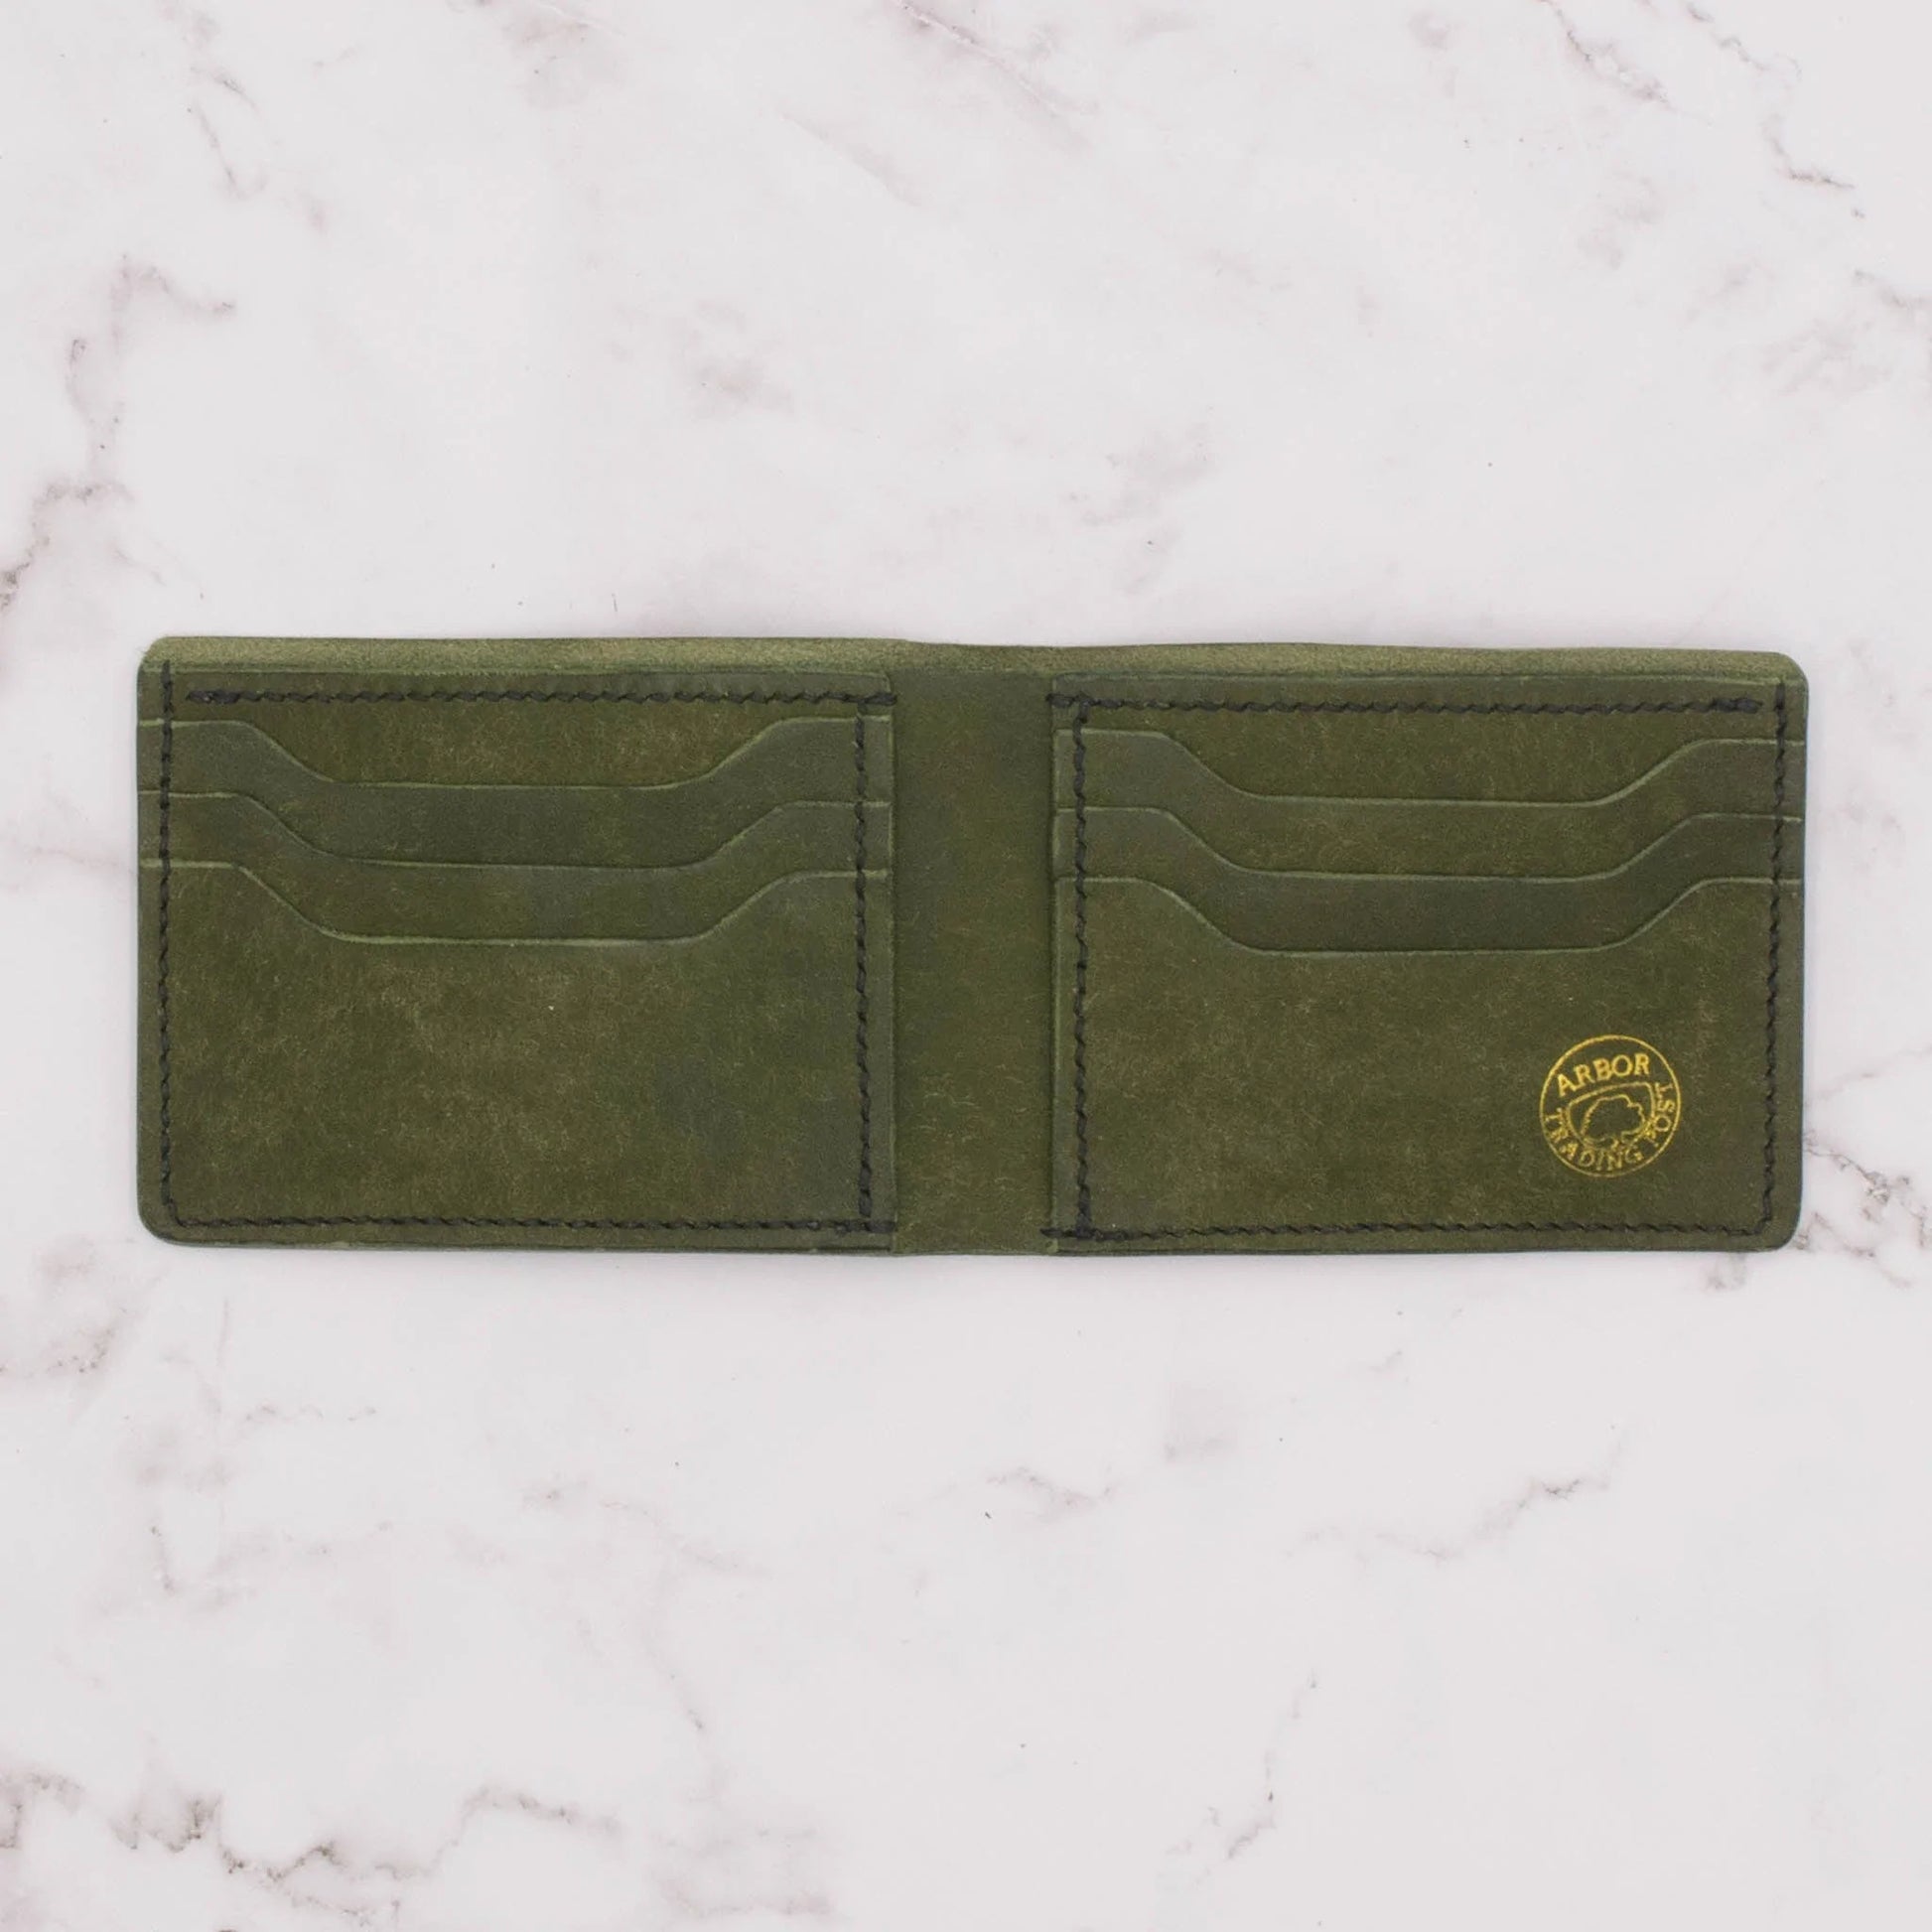 Cheekoo's Handcrafted Slim Classic Leather Bifold Wallet - Olive Green